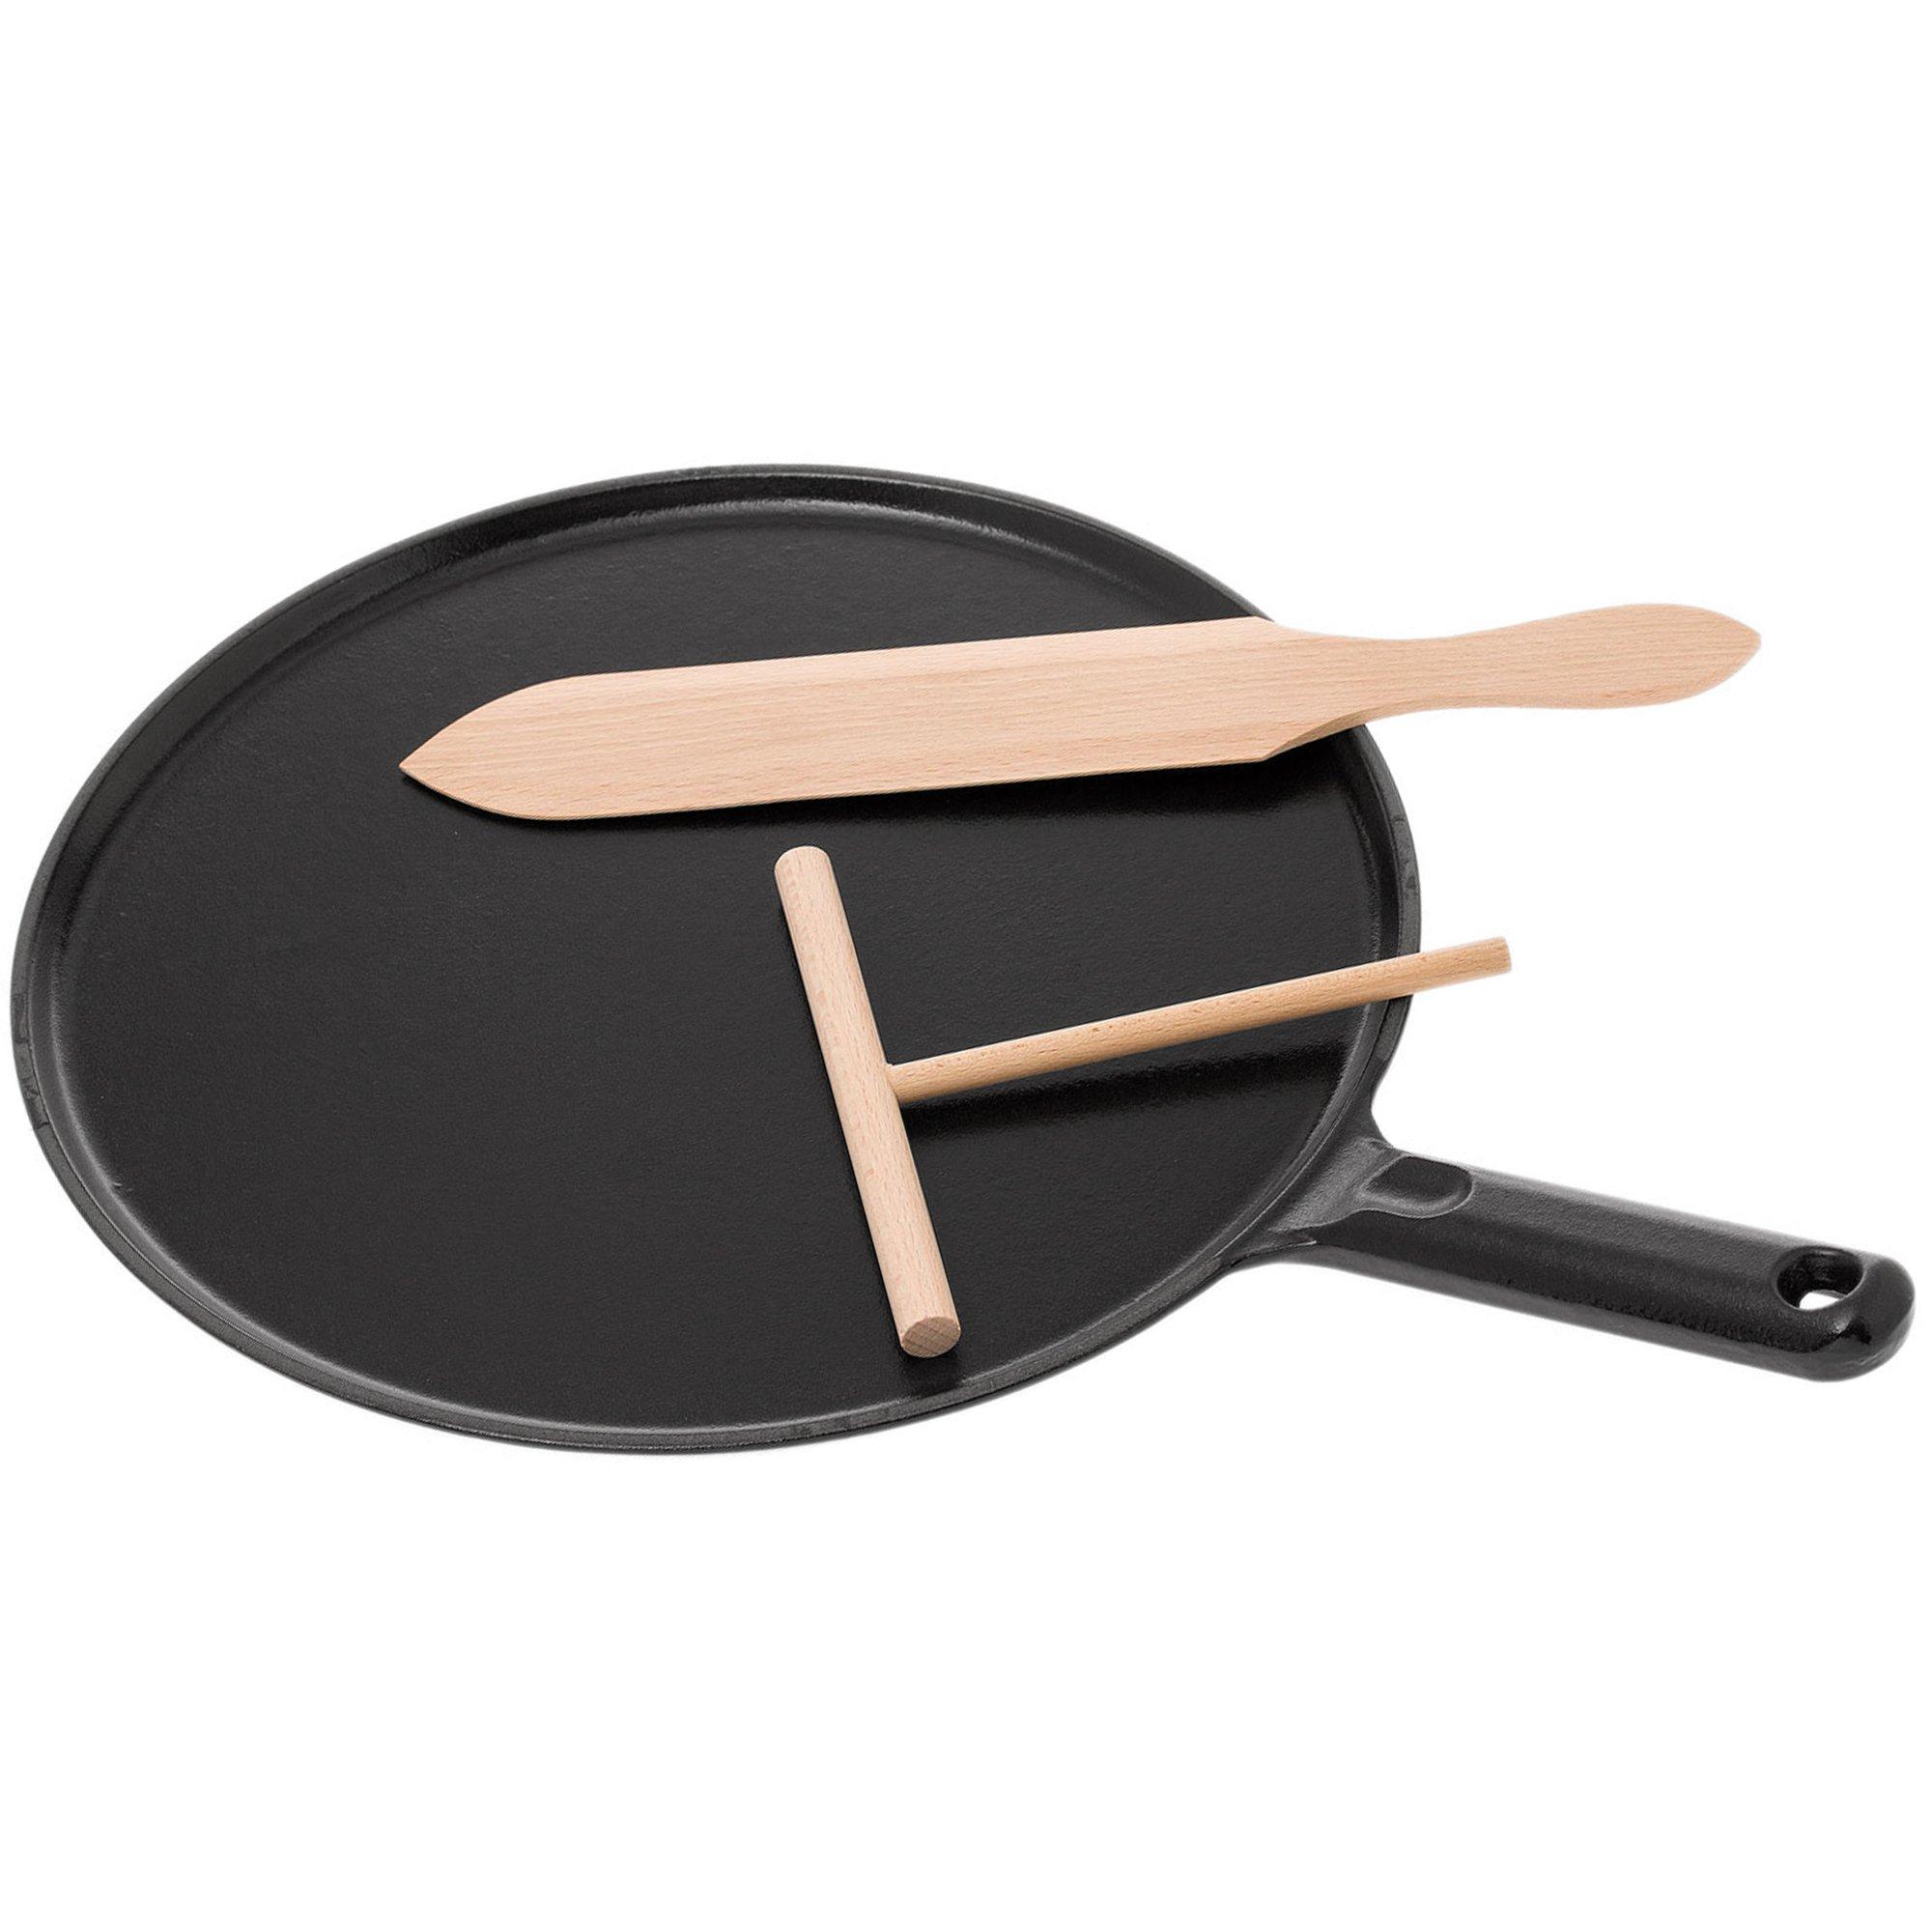 Shop Staub Cast Iron Crepe Pan with Spreader and Spatula at WT